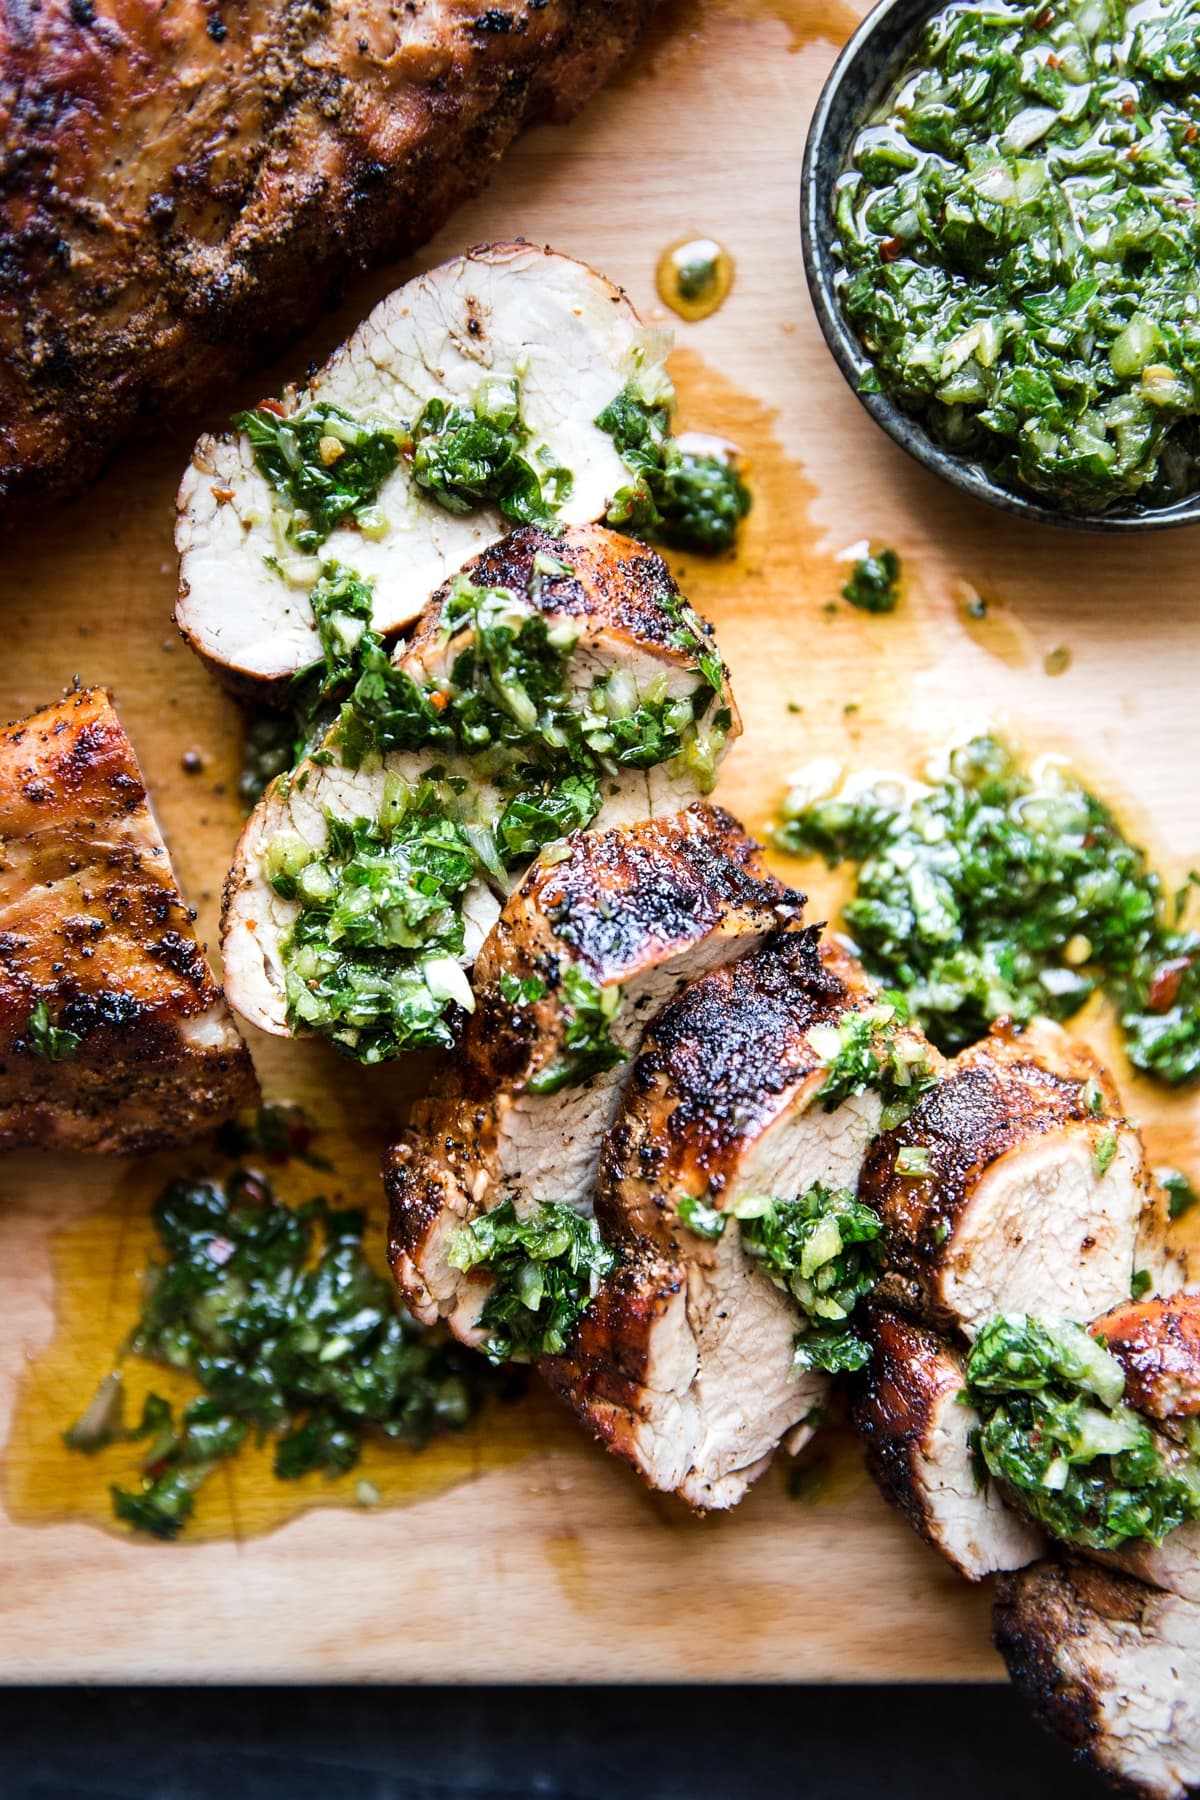 Grilled Pork Tenderloin With Chimichurri The Modern Proper,How To Cut A Mango With A Knife